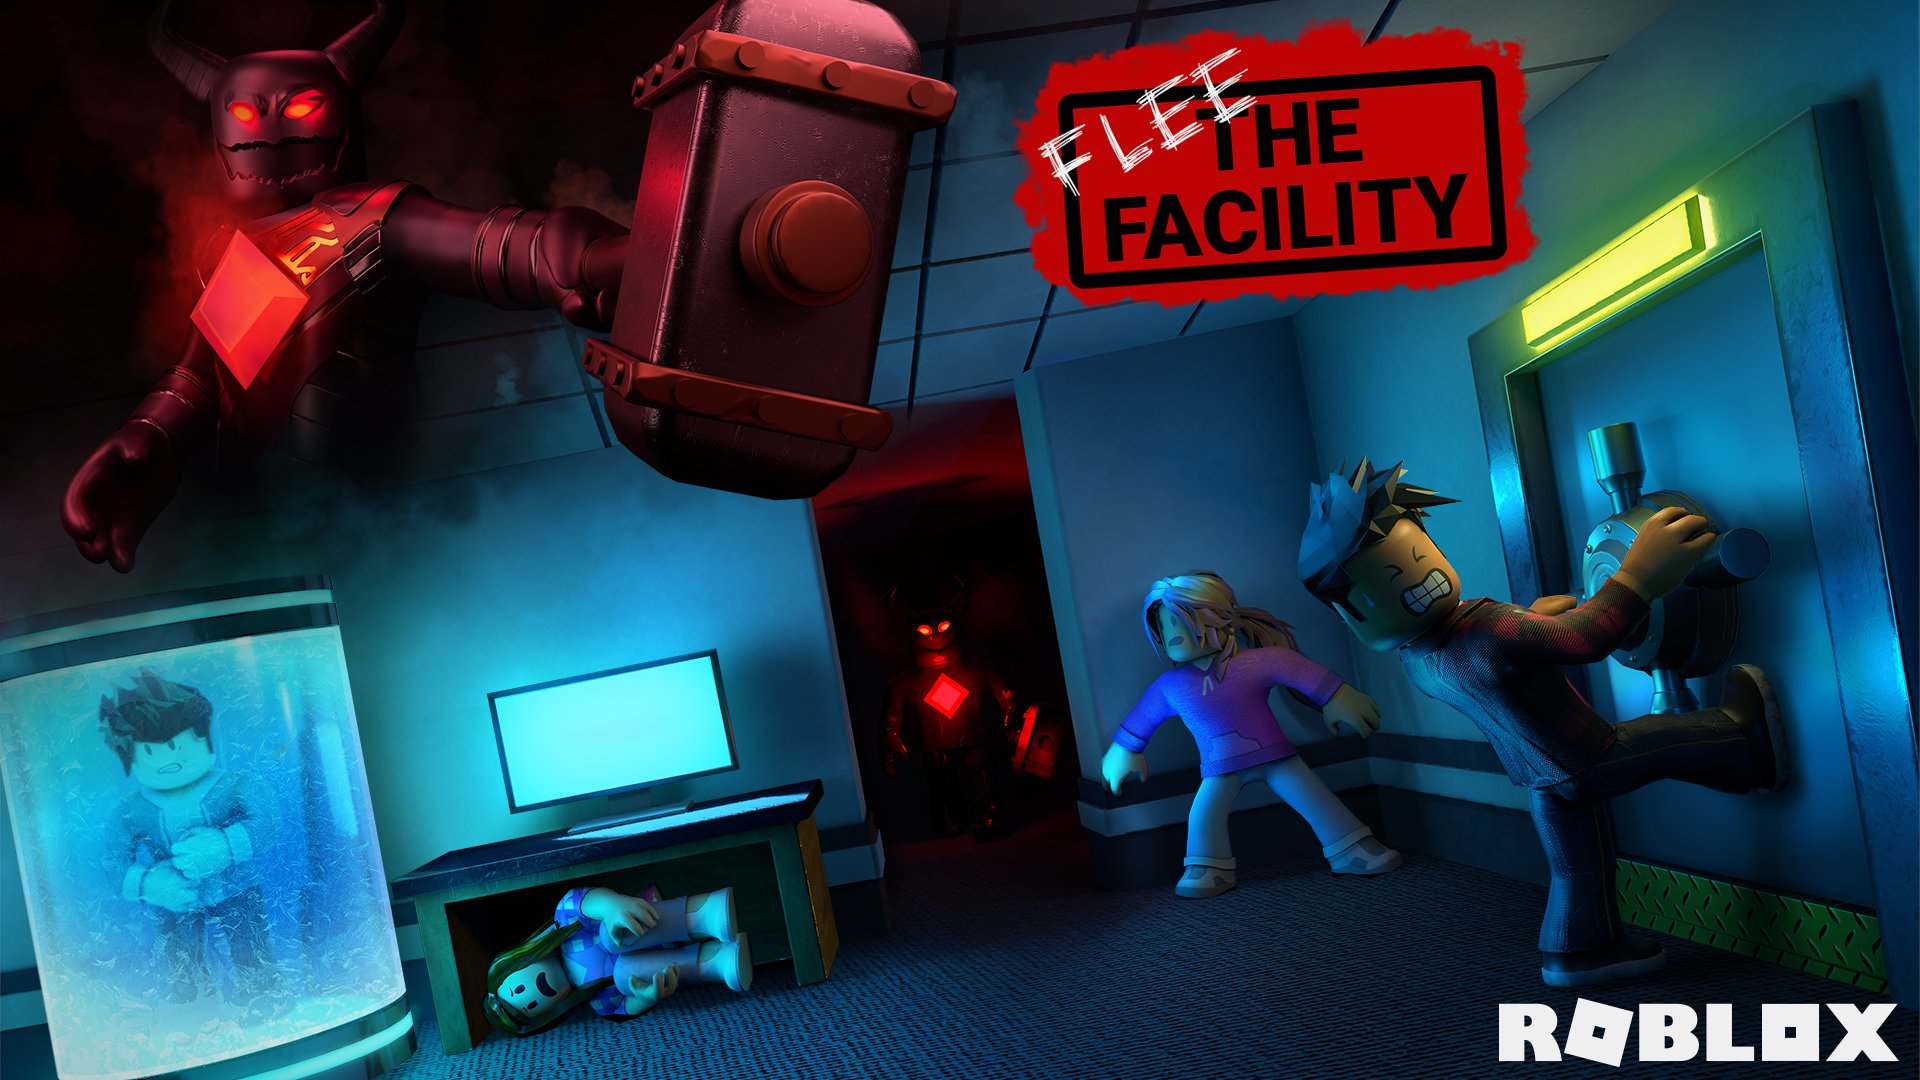 Andrew Mrwindy Willeitner On Twitter Just Uploaded Flee The Facility S Epic New Thumbnail Thanks Roblox For The Render - flee the facility on roblox